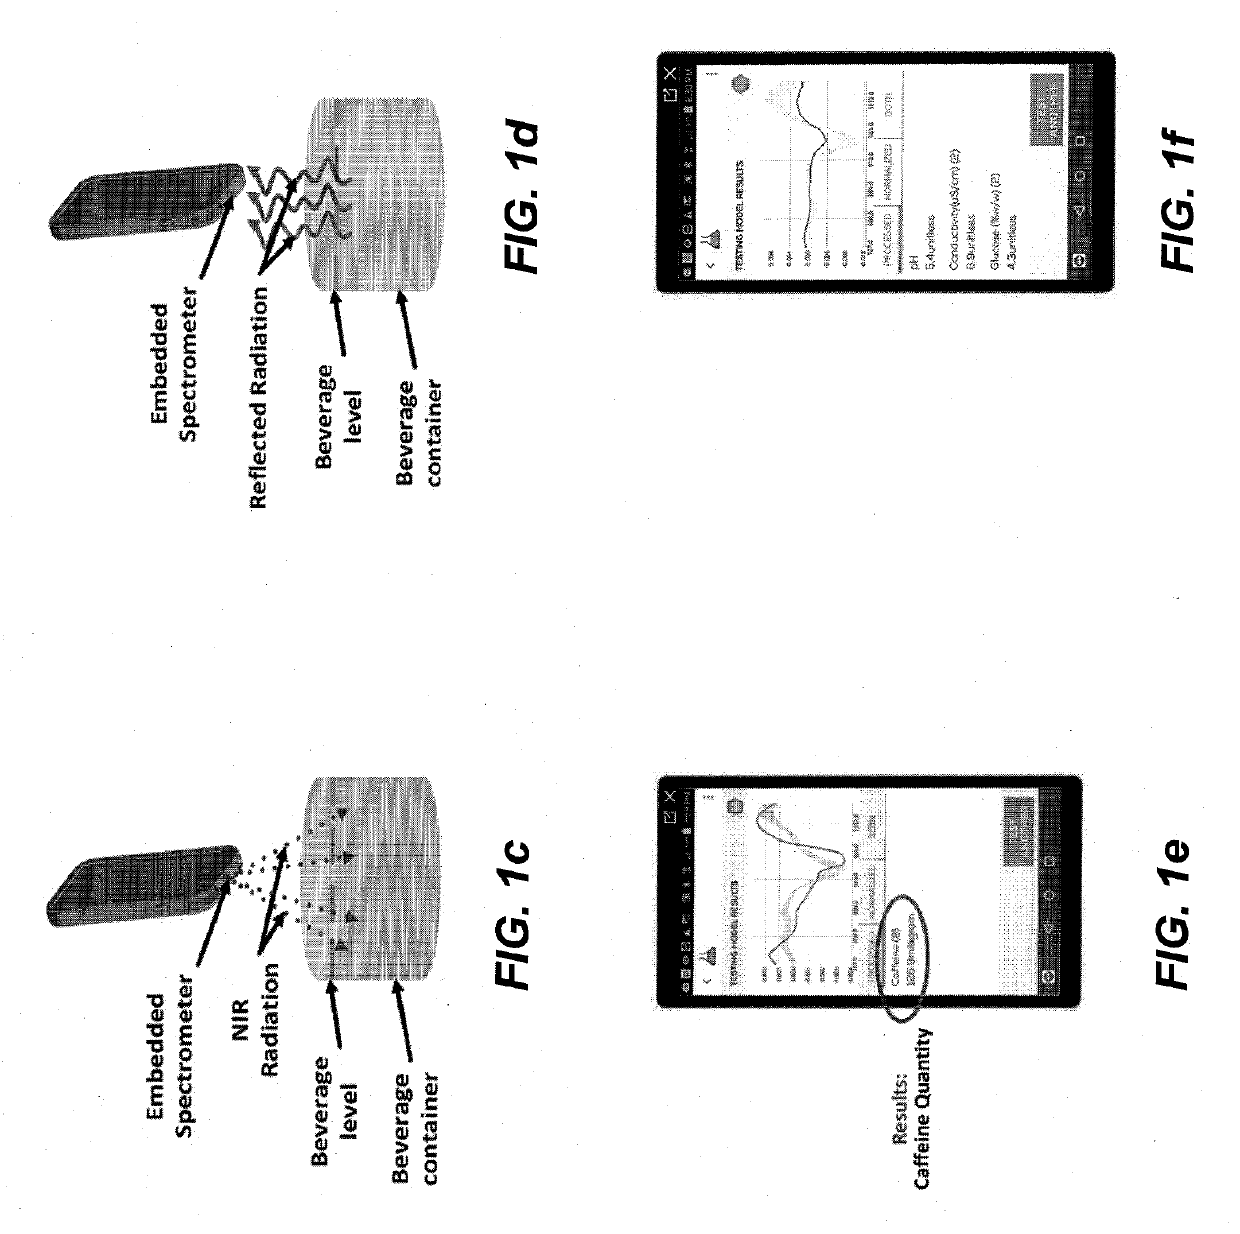 Smartphone companion device material sensing and improved phone performance